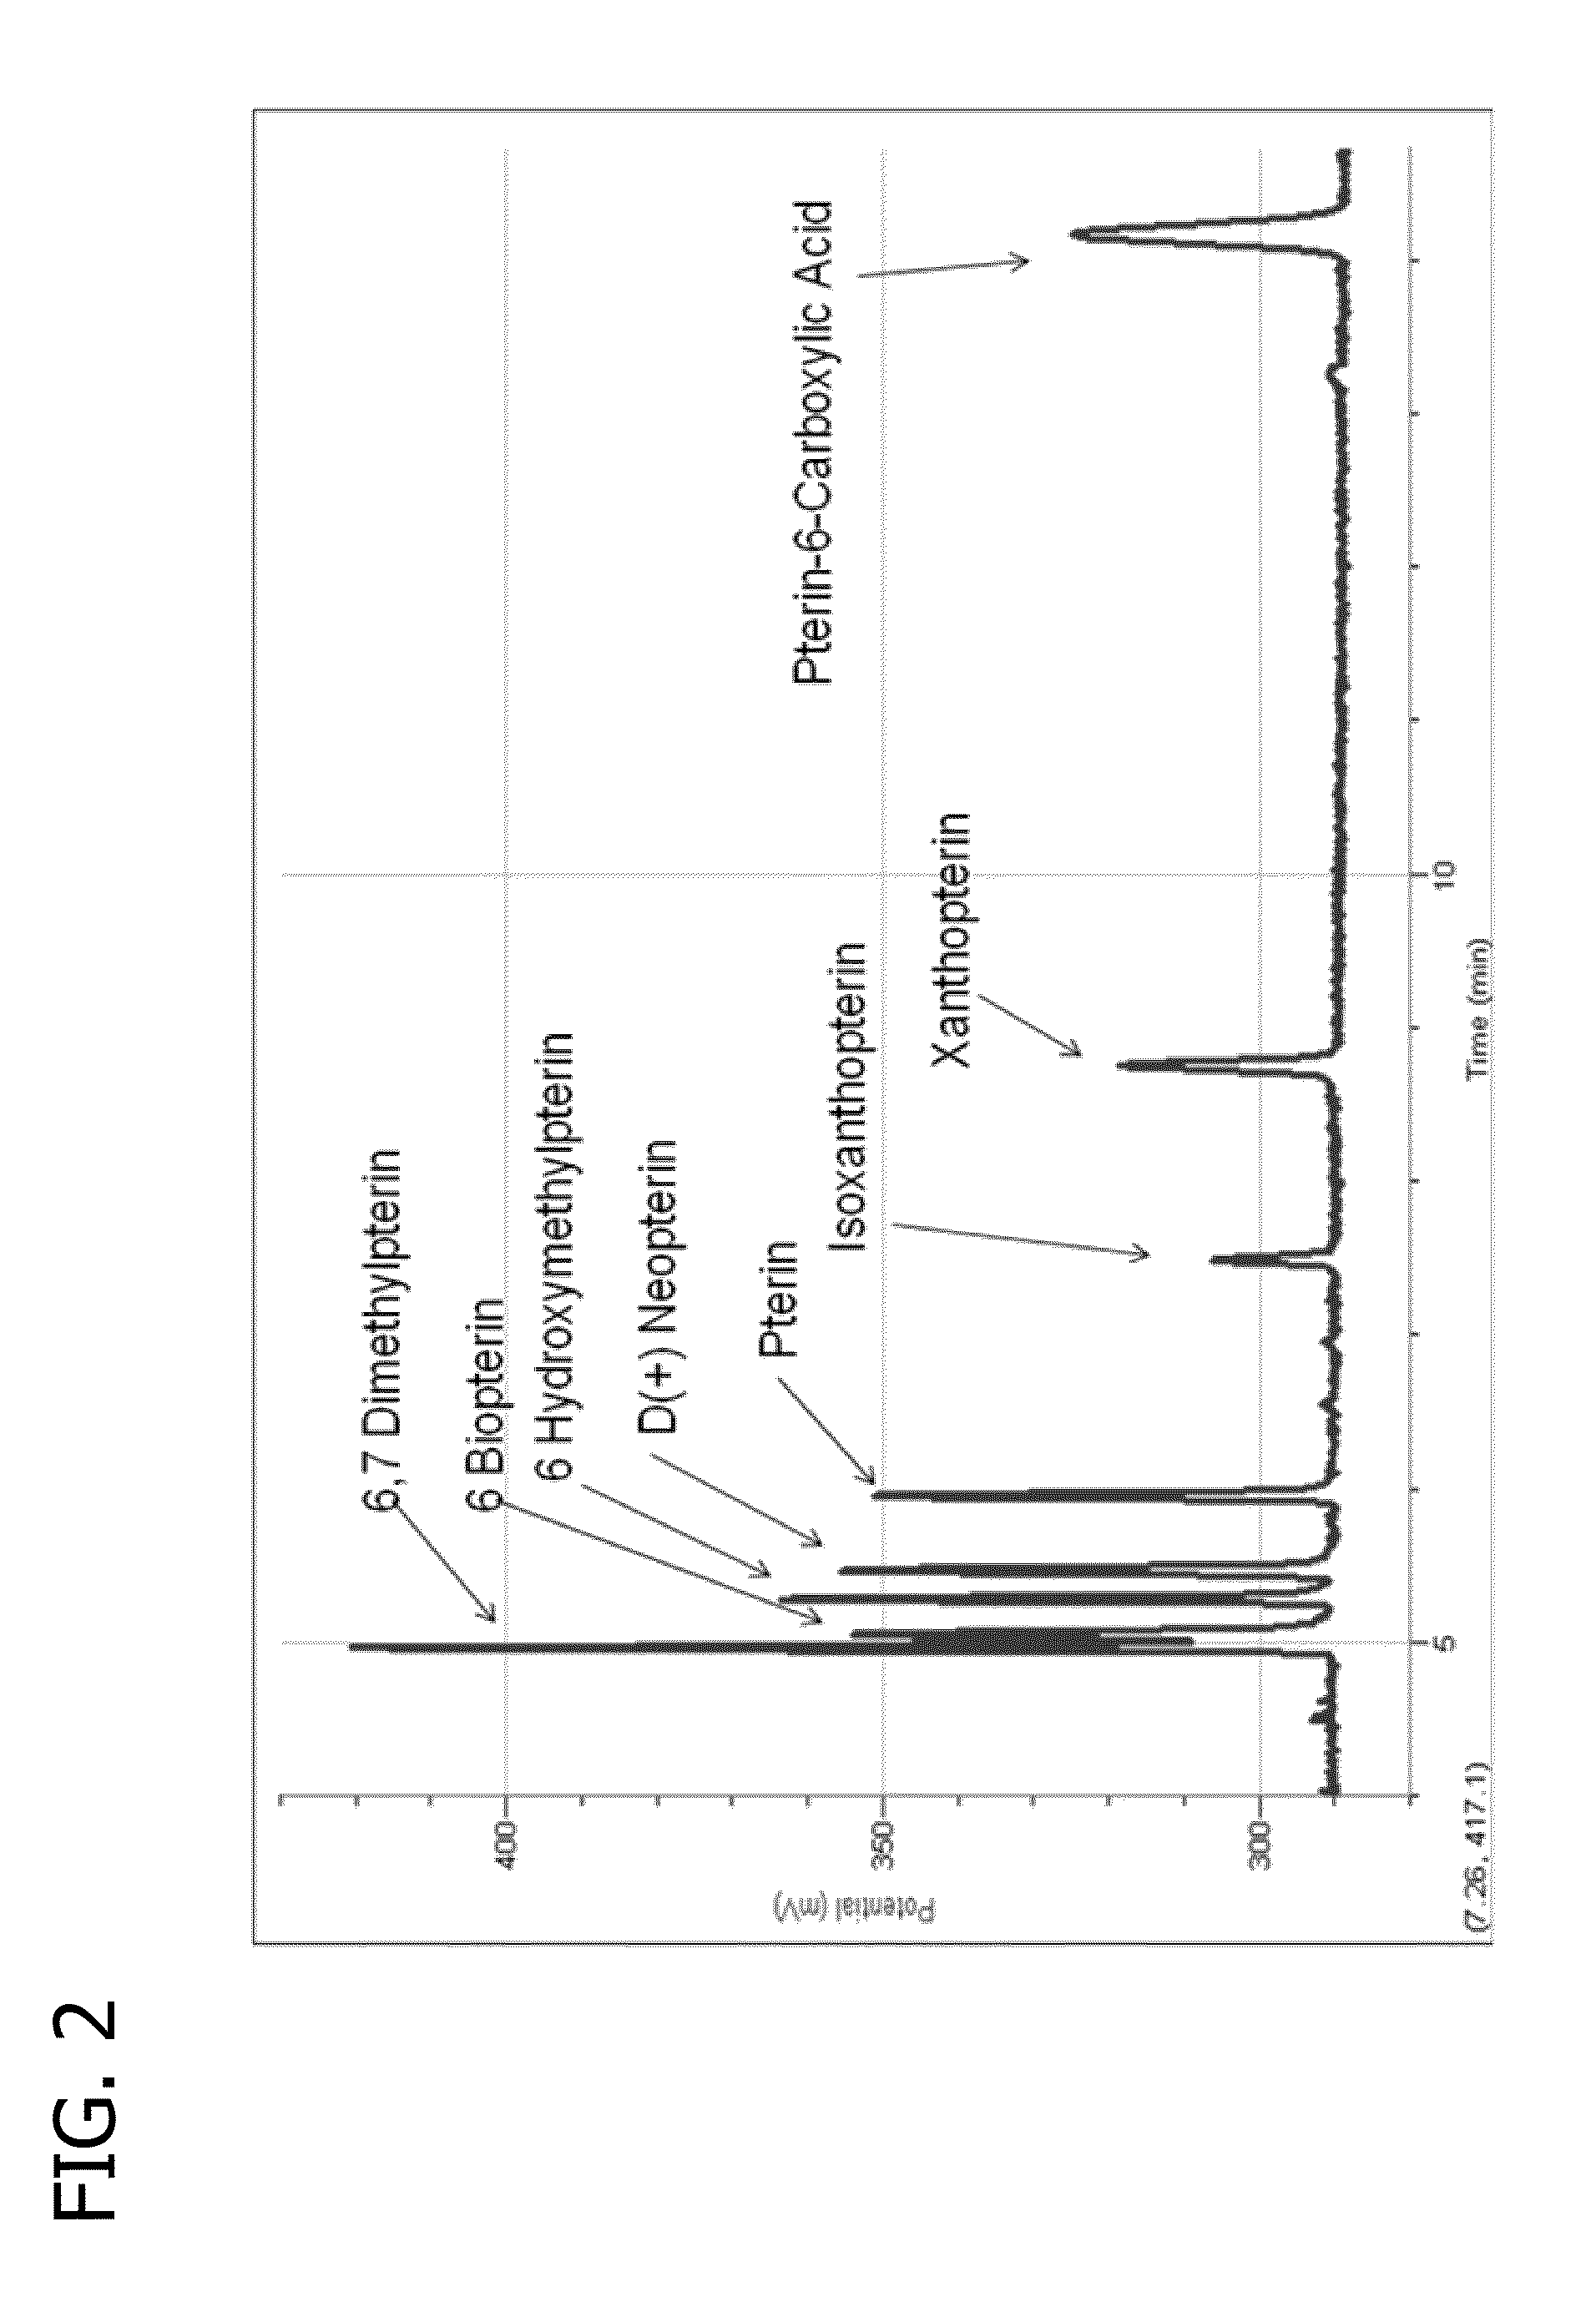 Method and apparatus for cancer screening